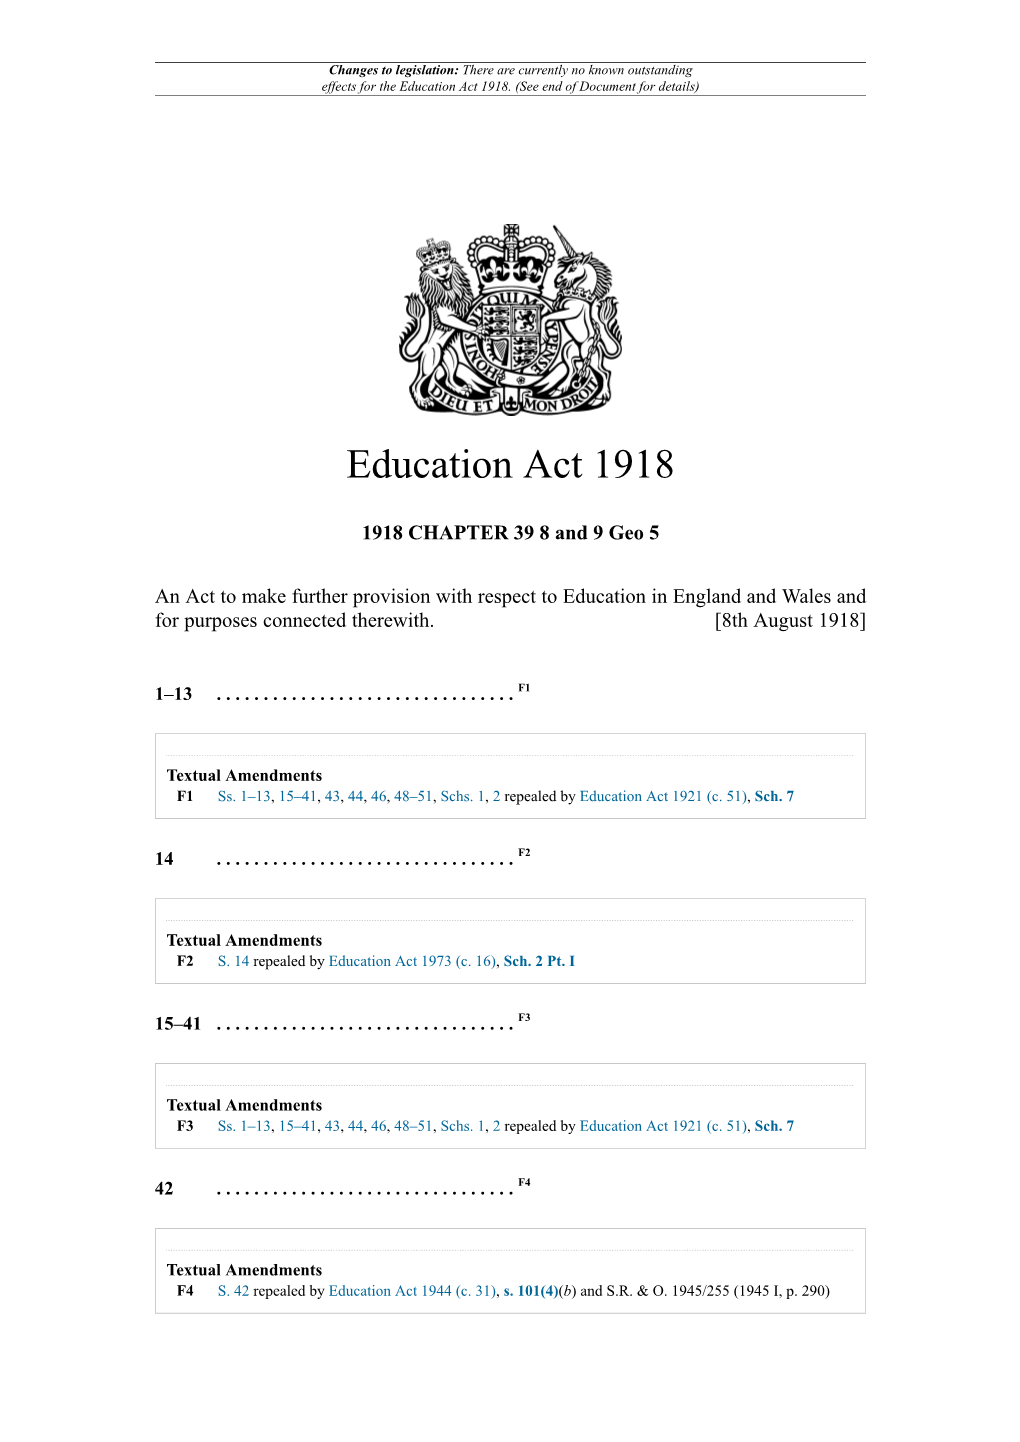 Education Act 1918